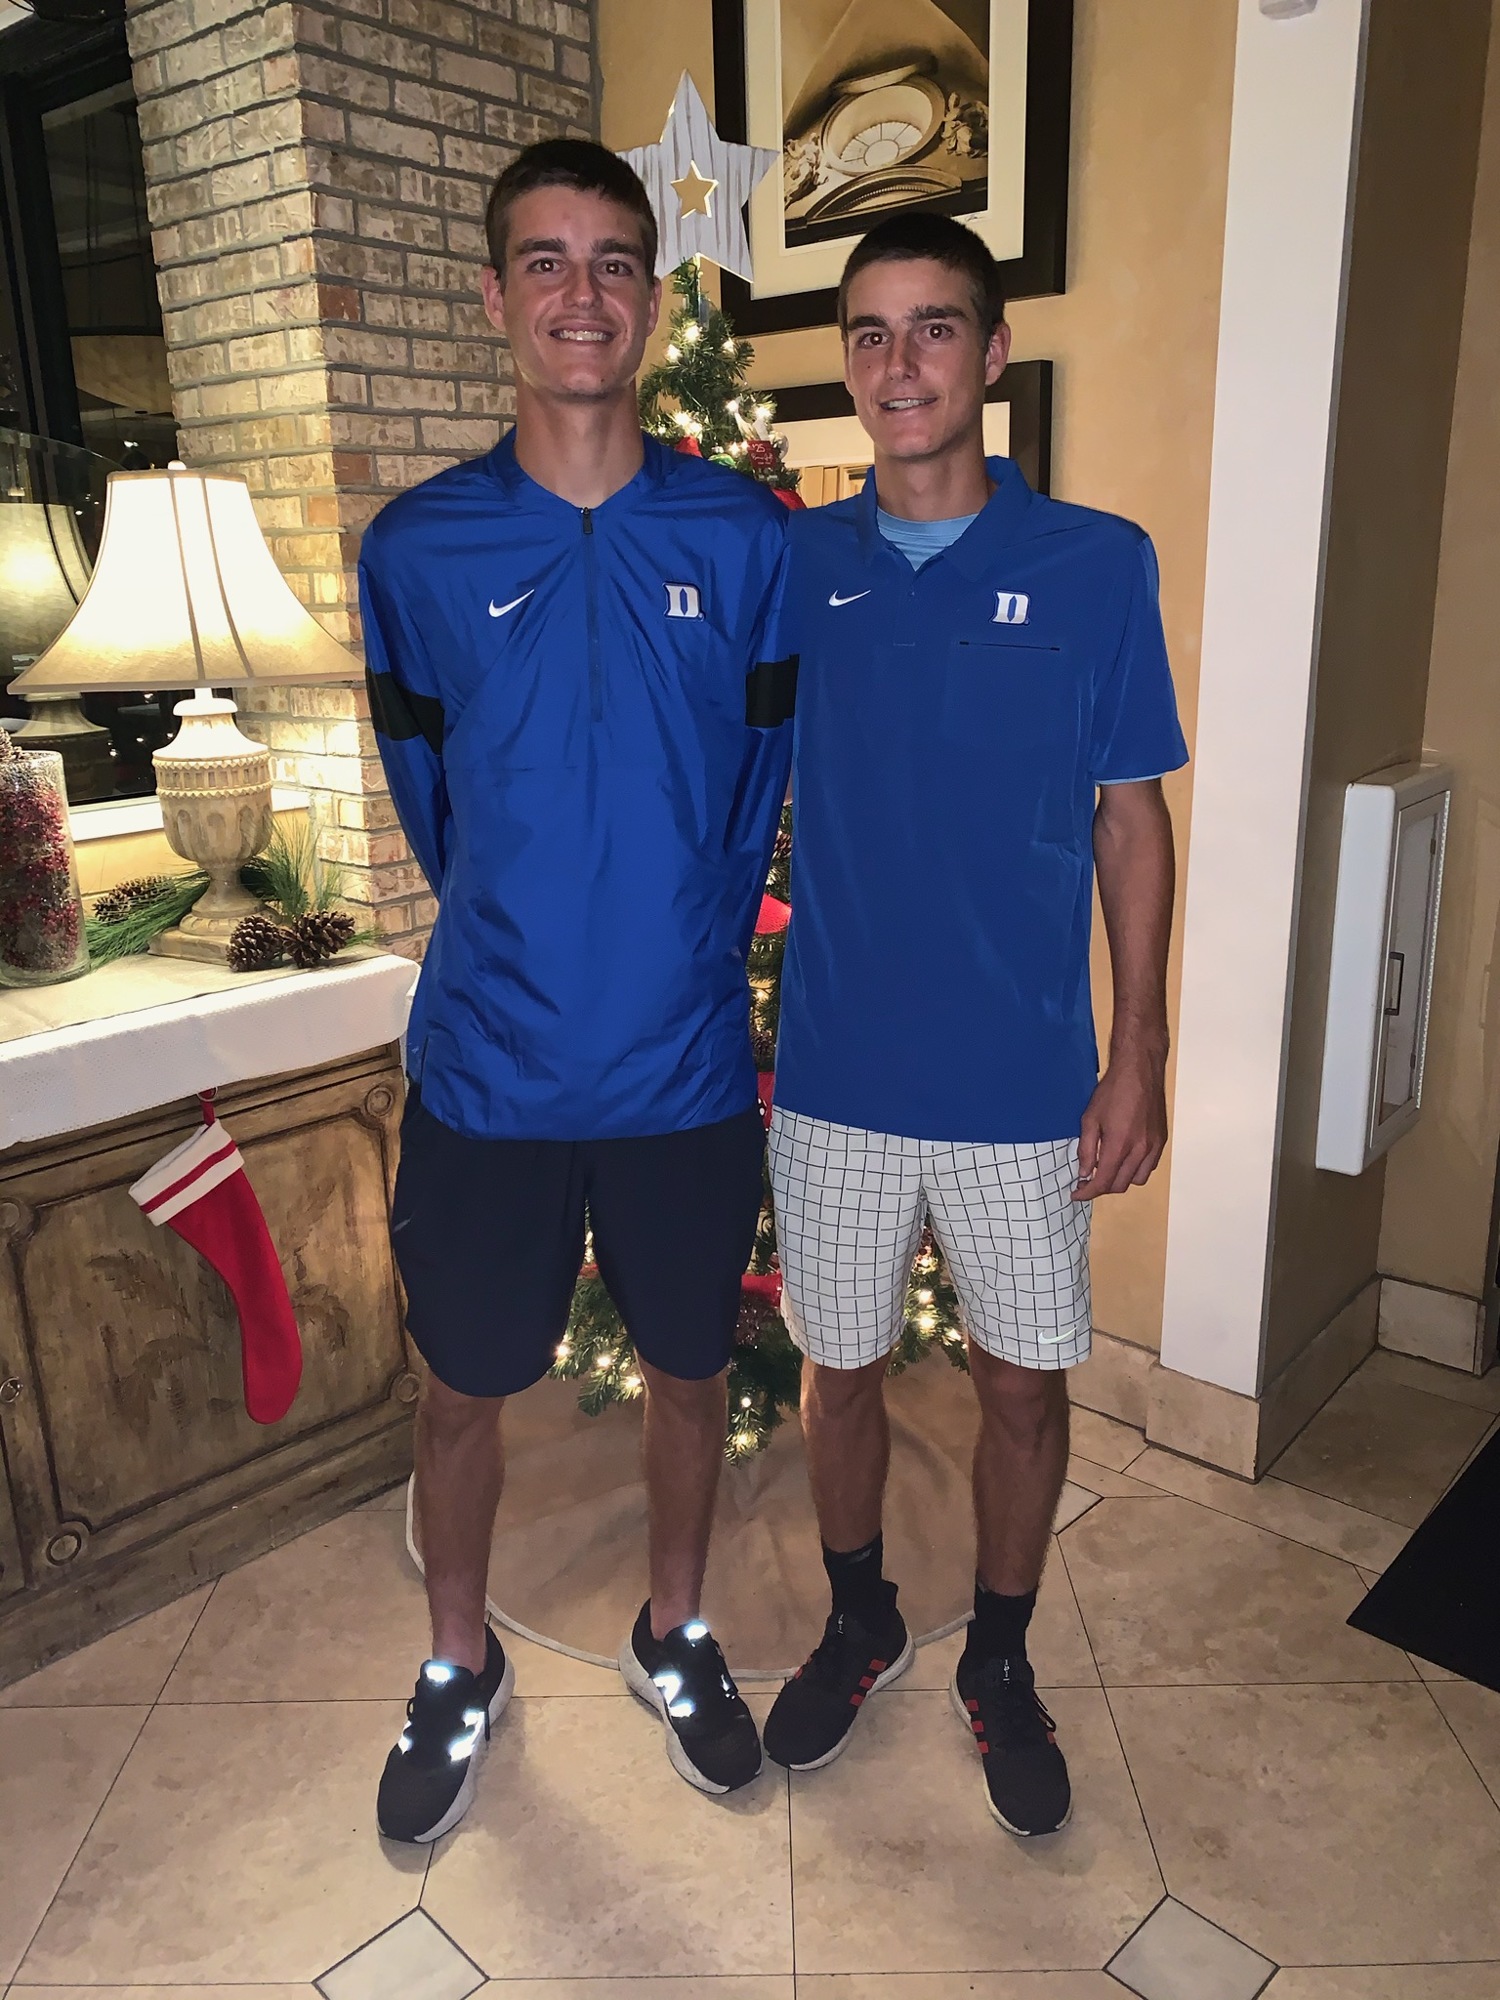 7. Twins Connor and Jake Krug committed to Duke for tennis. Photo courtesy Dick Vitale.